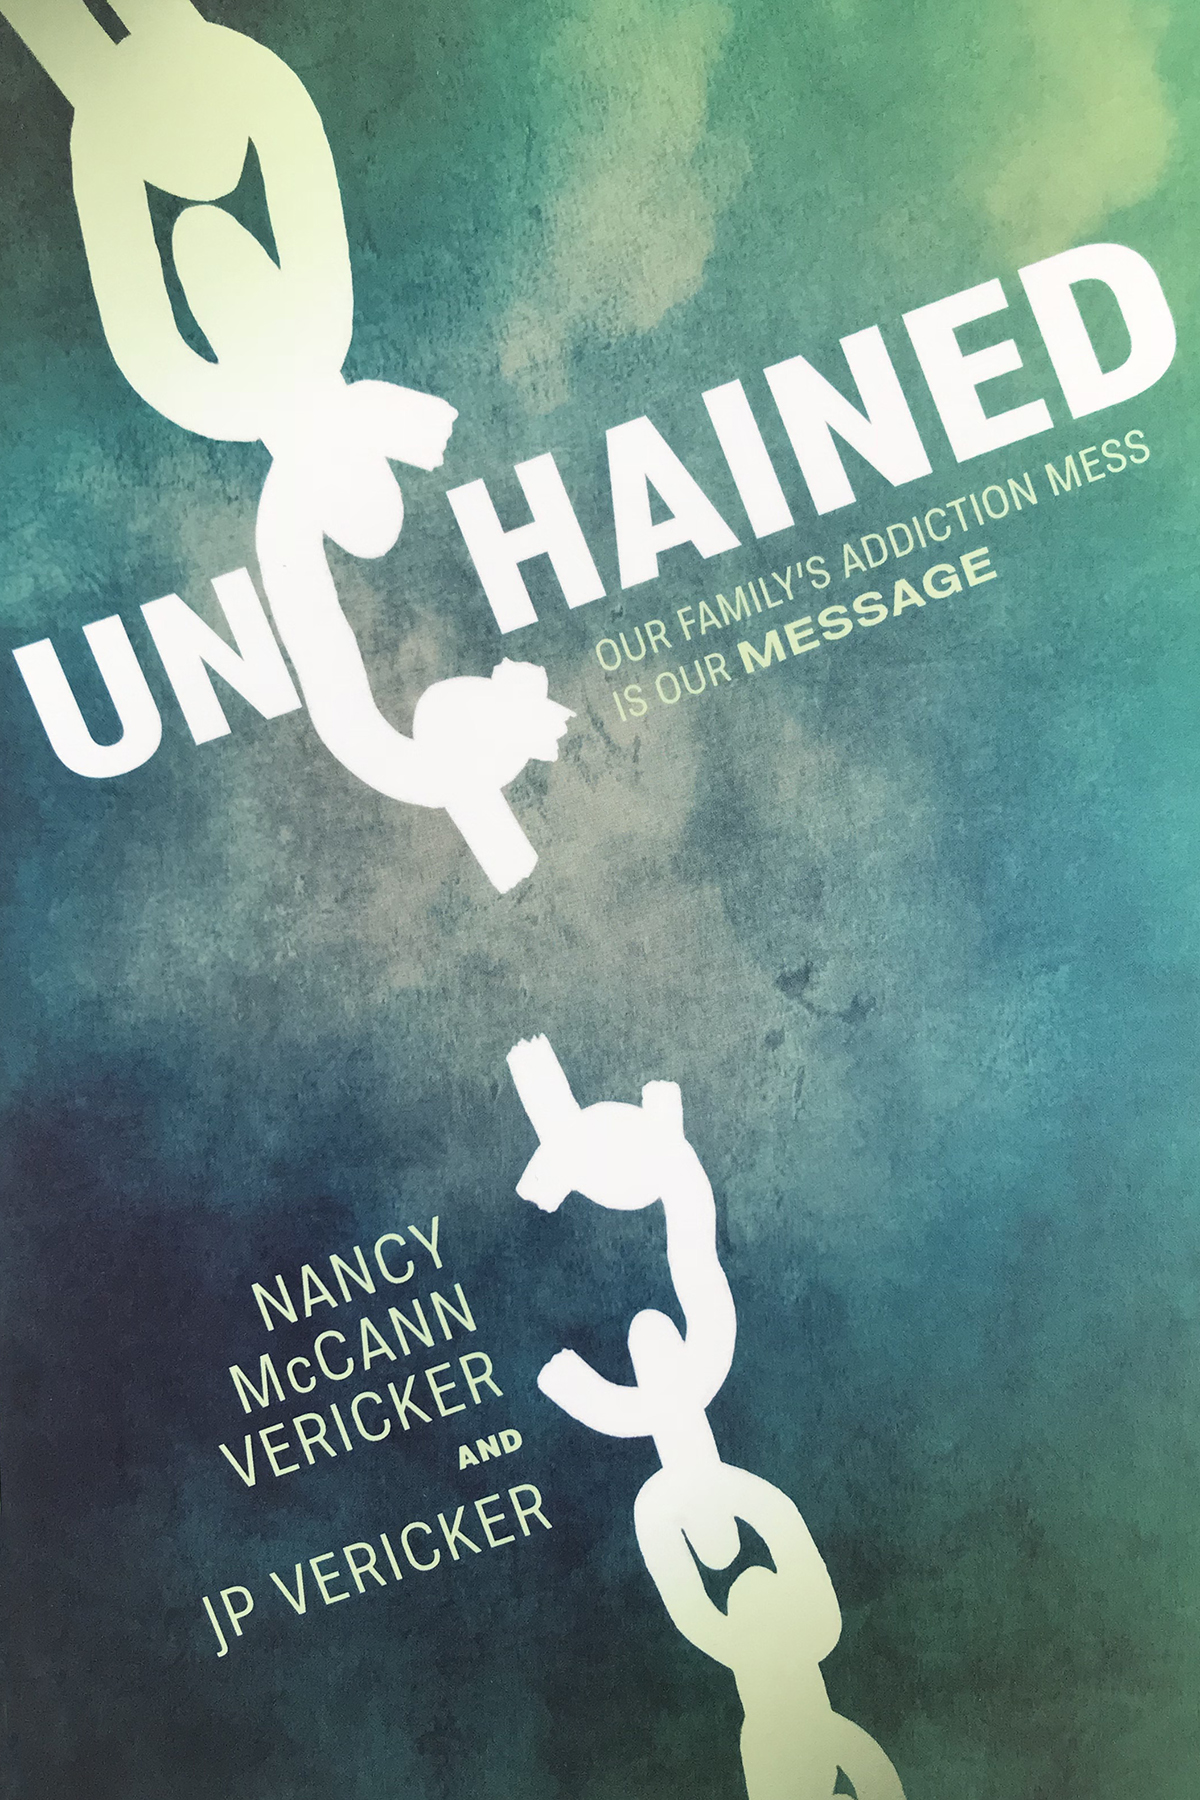 The cover of Nancy and J.P. Vericker's book, Unchained